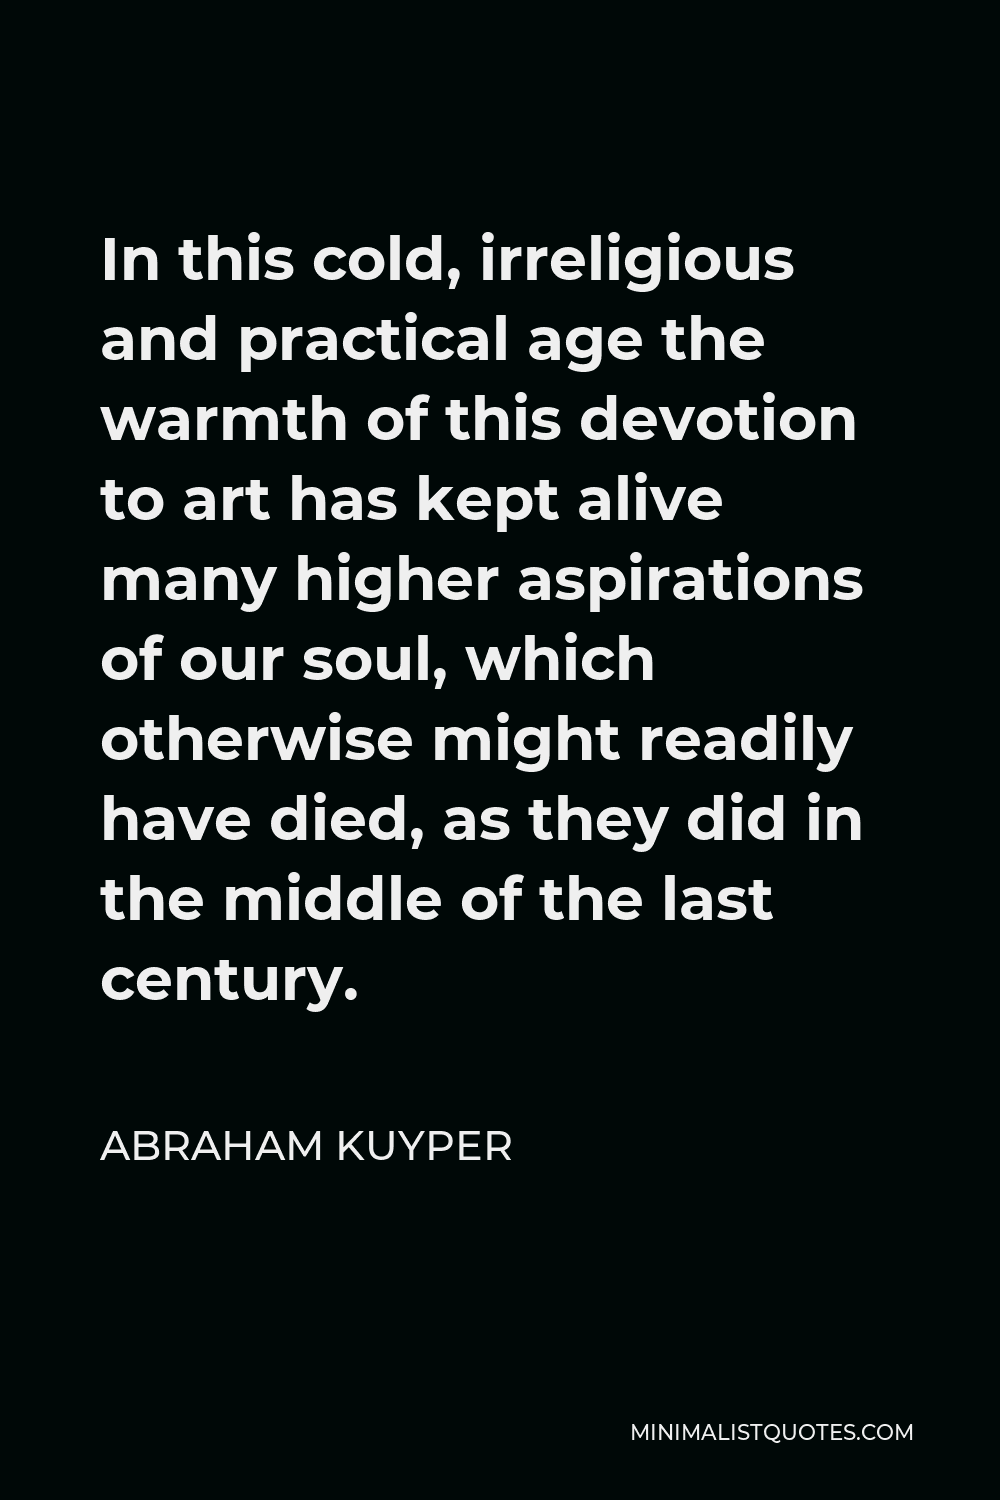 Abraham Kuyper Quote - In this cold, irreligious and practical age the warmth of this devotion to art has kept alive many higher aspirations of our soul, which otherwise might readily have died, as they did in the middle of the last century.